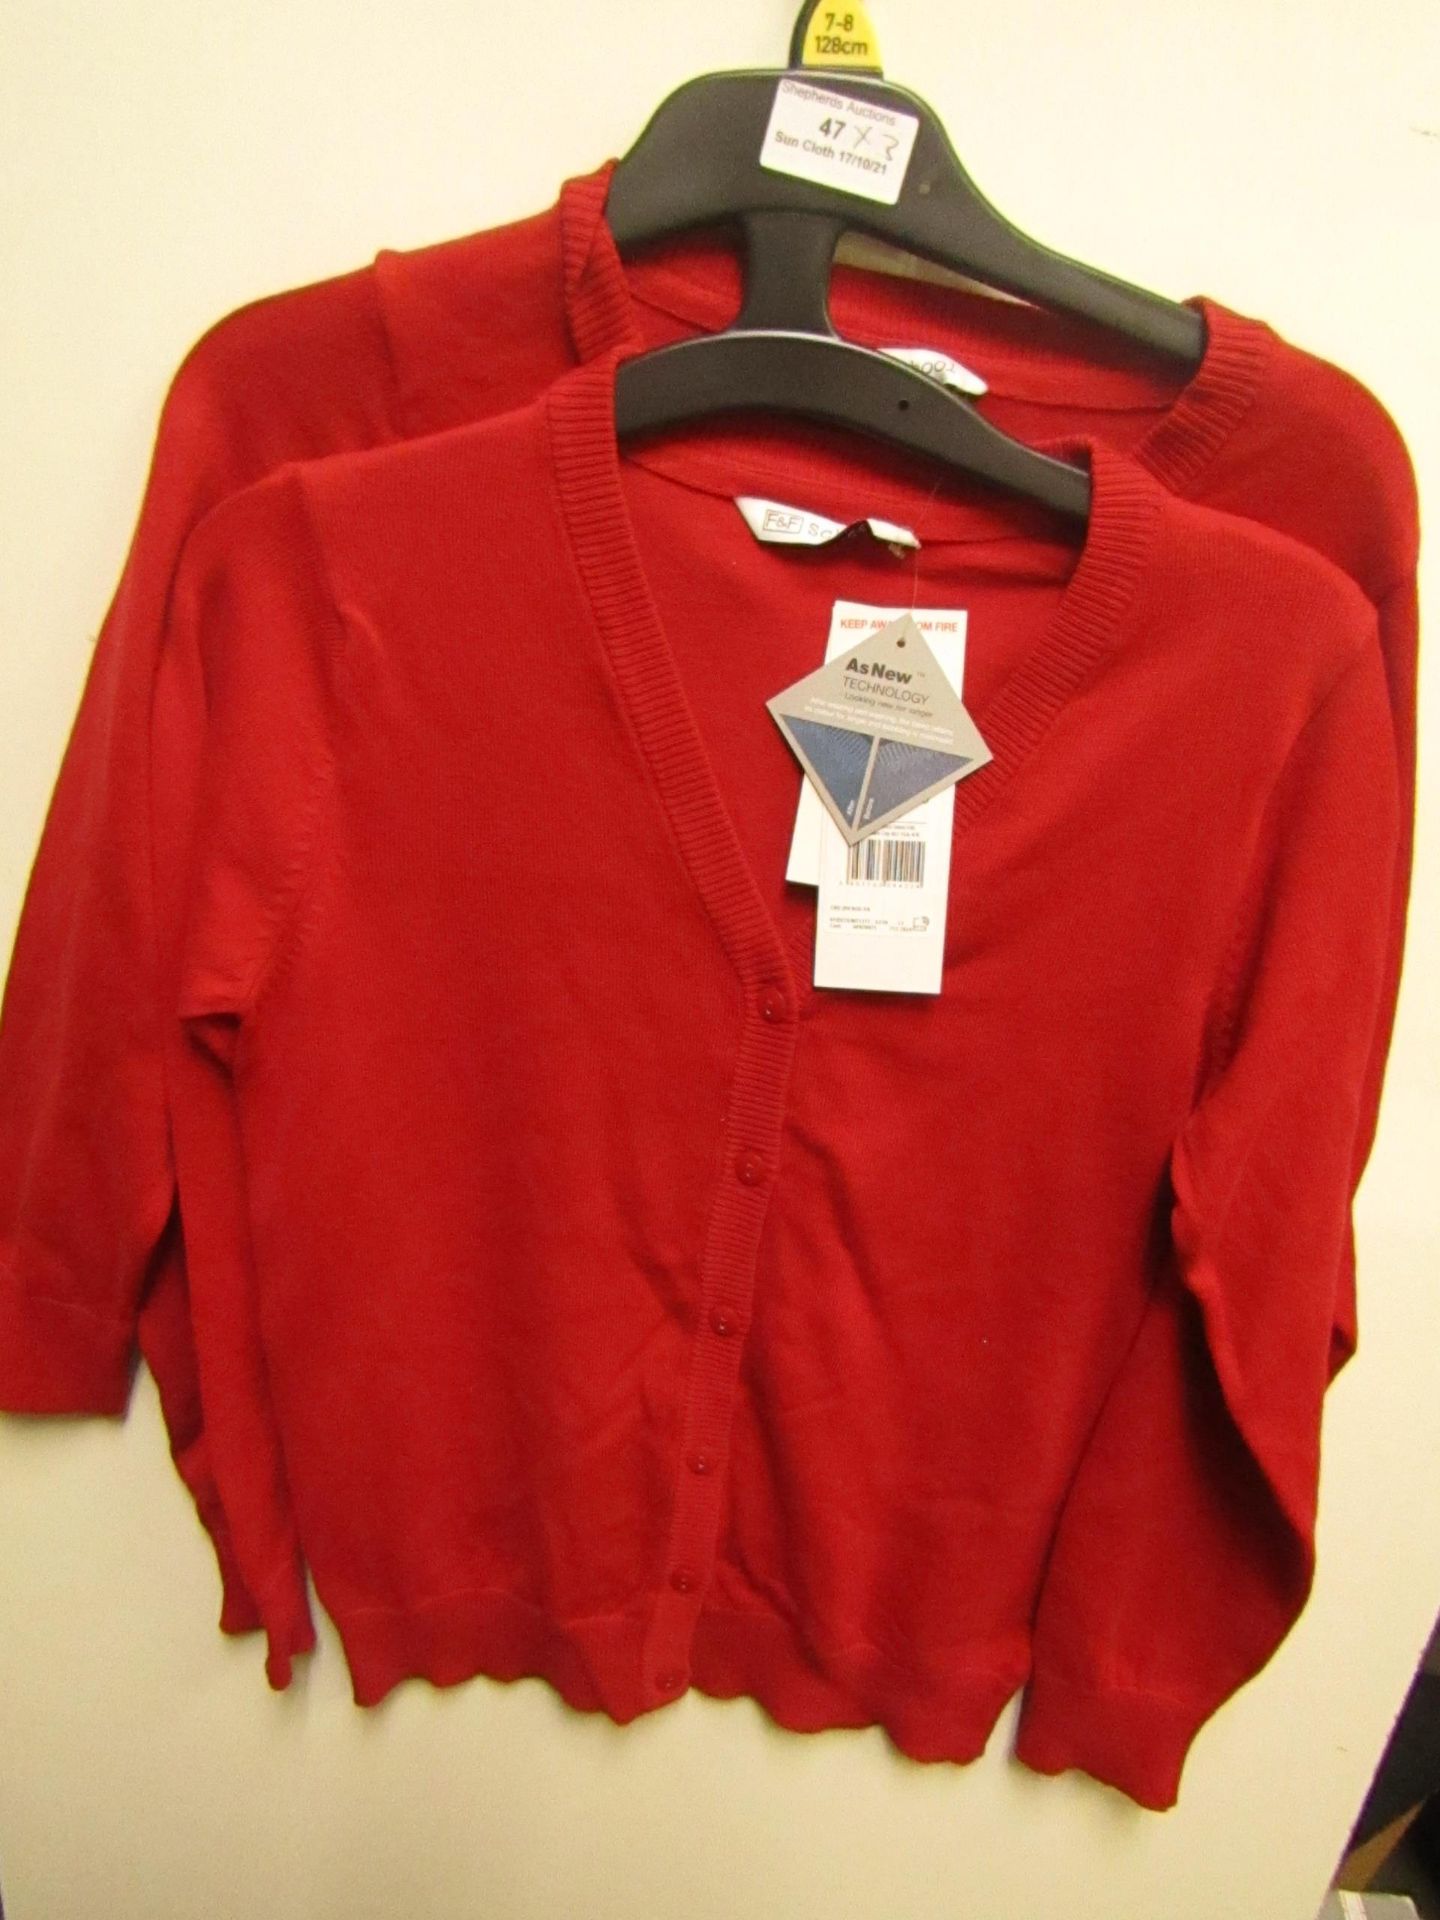 10 X F&F Girls Red School Jumpers Aged 7-8yrs New With Tags